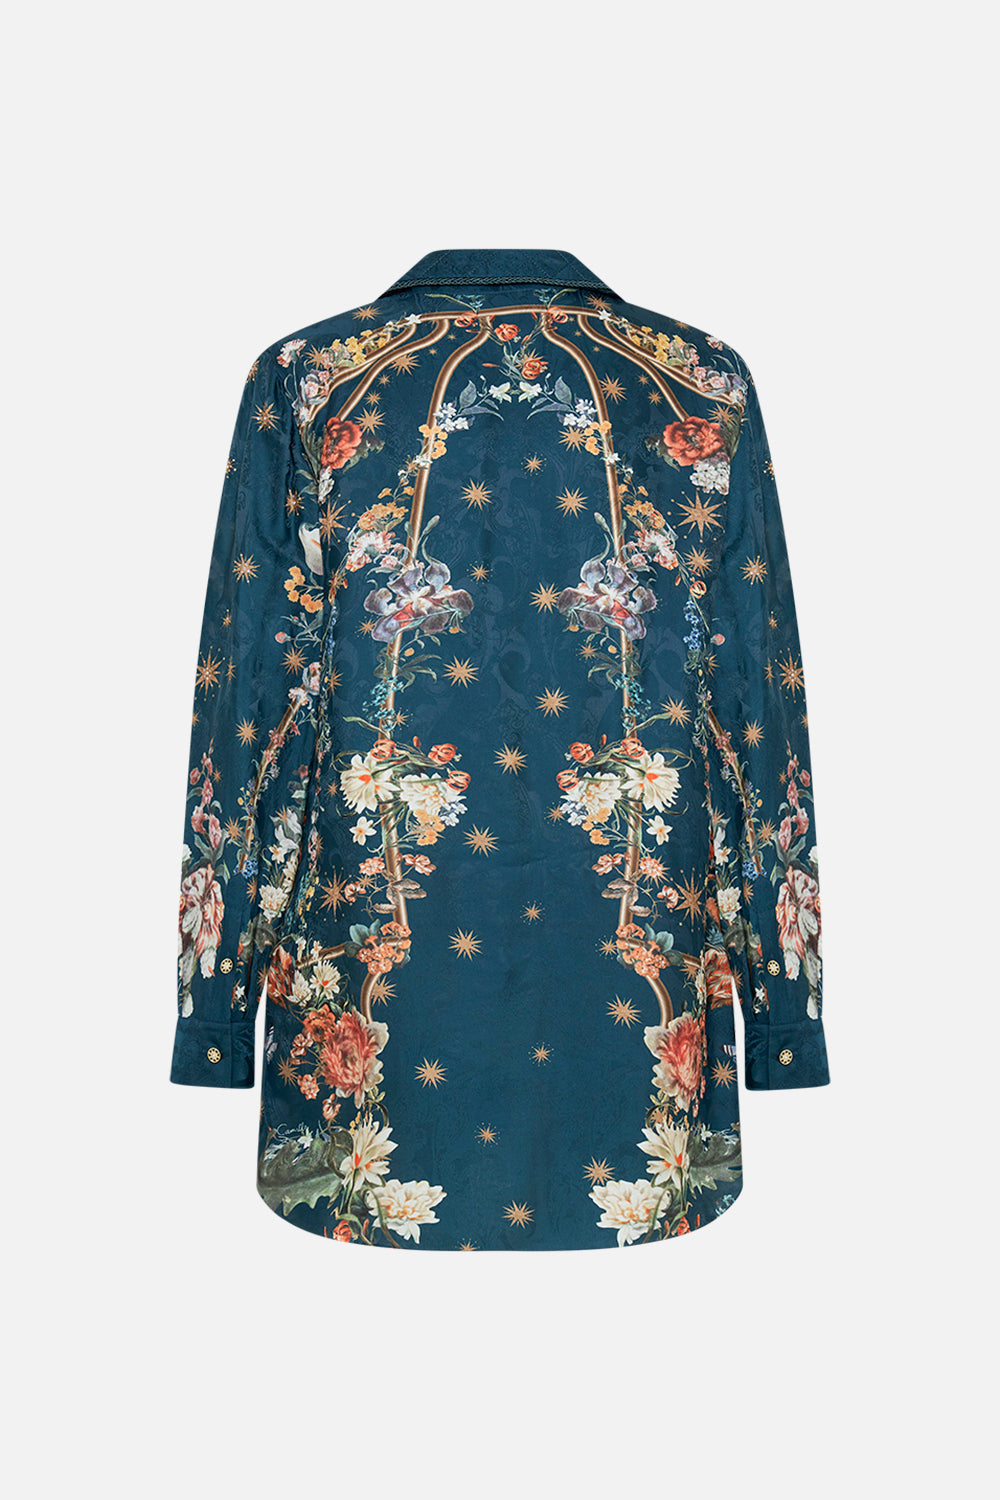 CAMILLA silk jacket in She Who Wears The Crown print